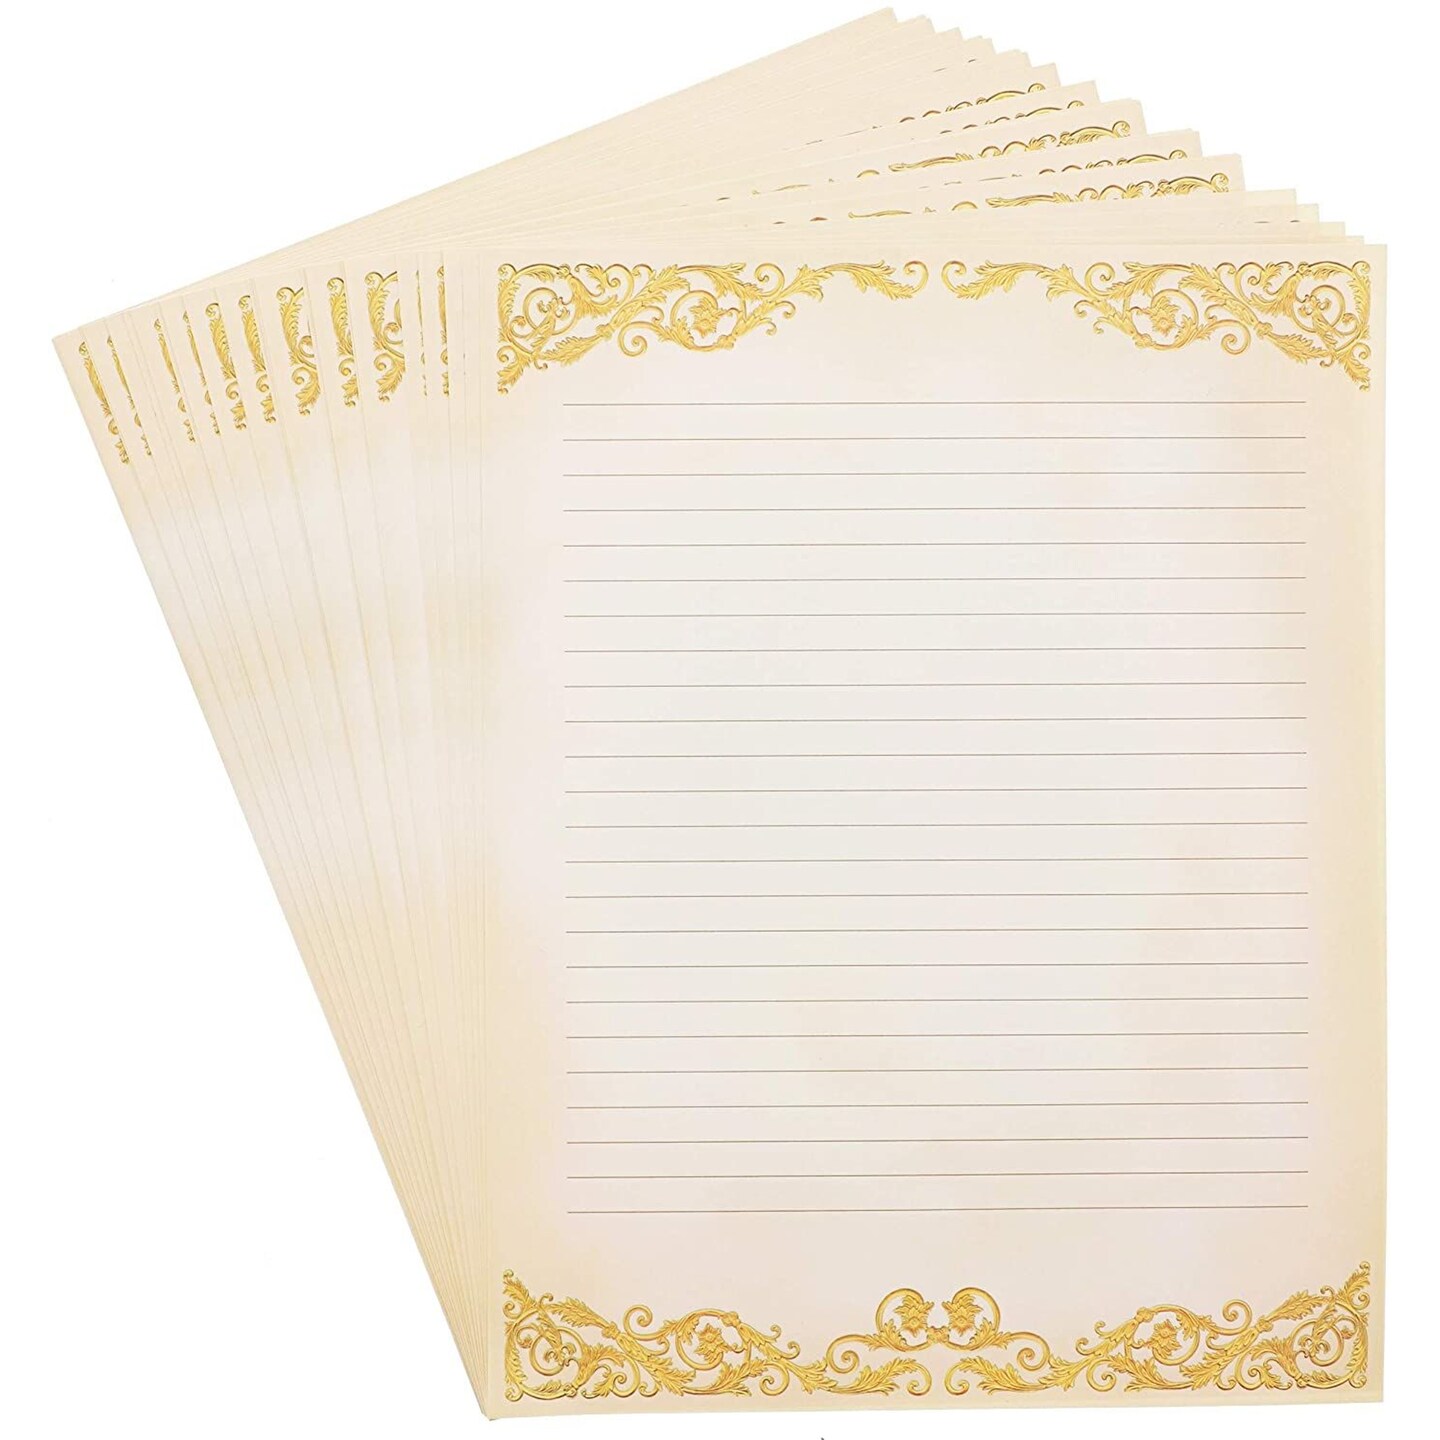 48-Pack Vintage-Style Lined Stationary Paper for Writing Letters